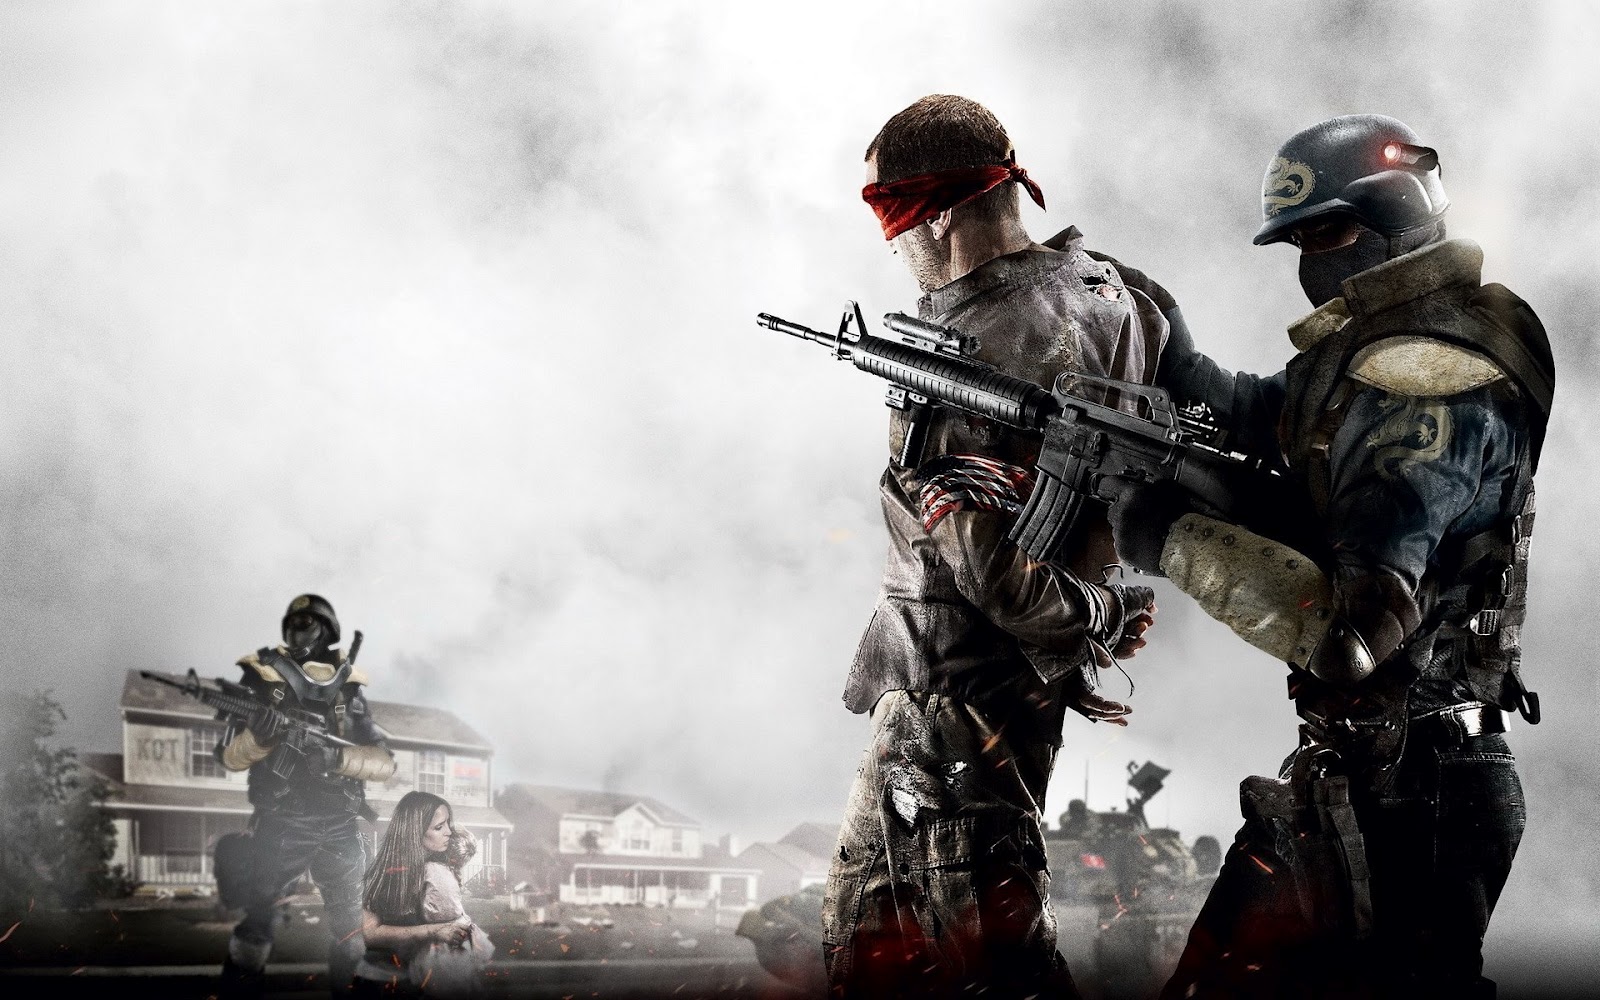 Awesome Graphics Shooter HD Wallpaper Video Game Desktop